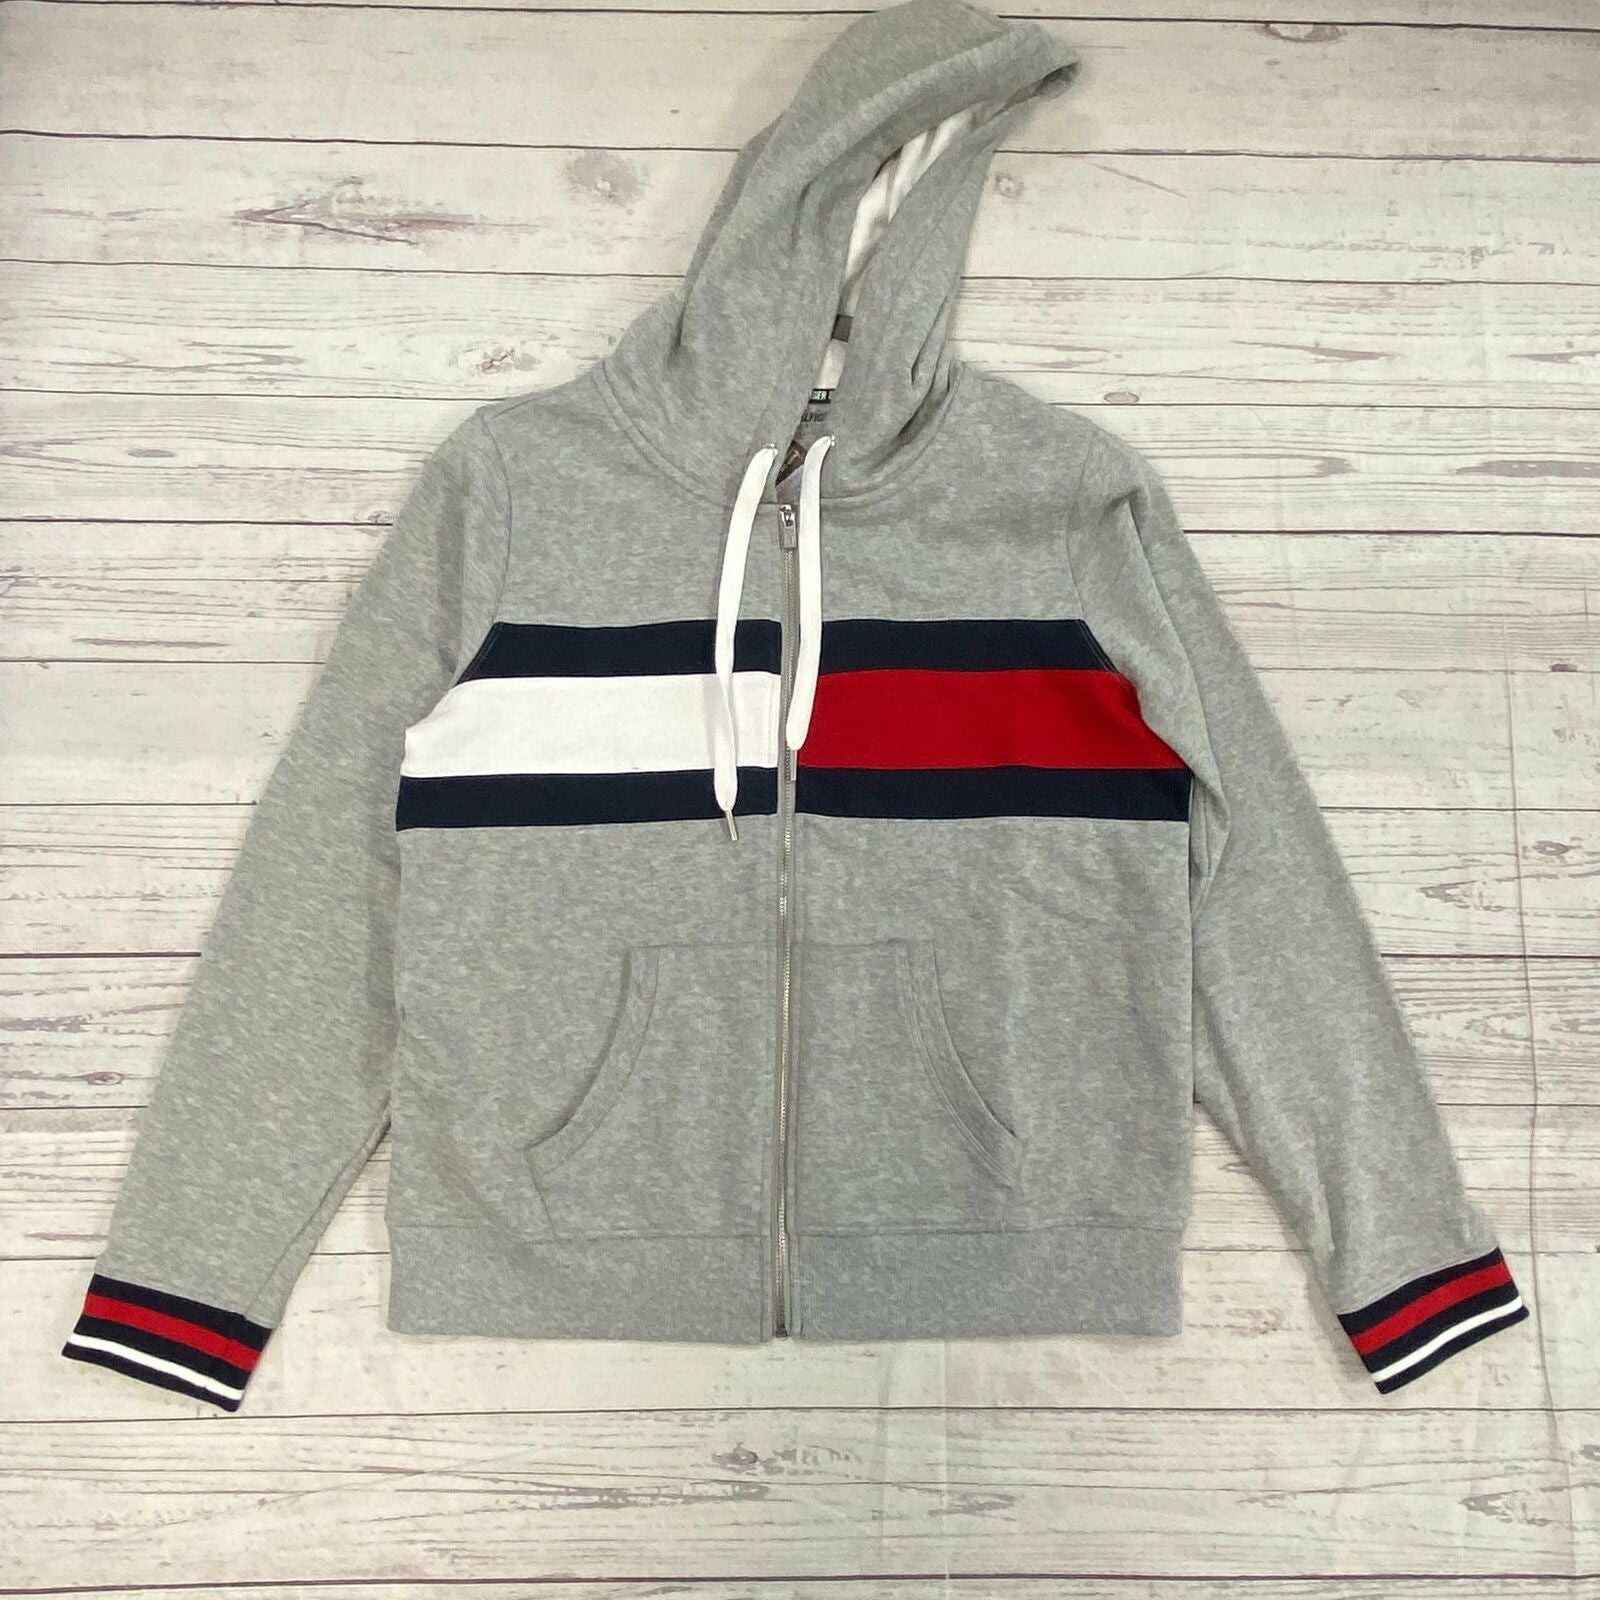 Tommy Hilfiger Sport Gray Logo Zip Up Hoodie Sweater Jacket Woman’s Size L NEW